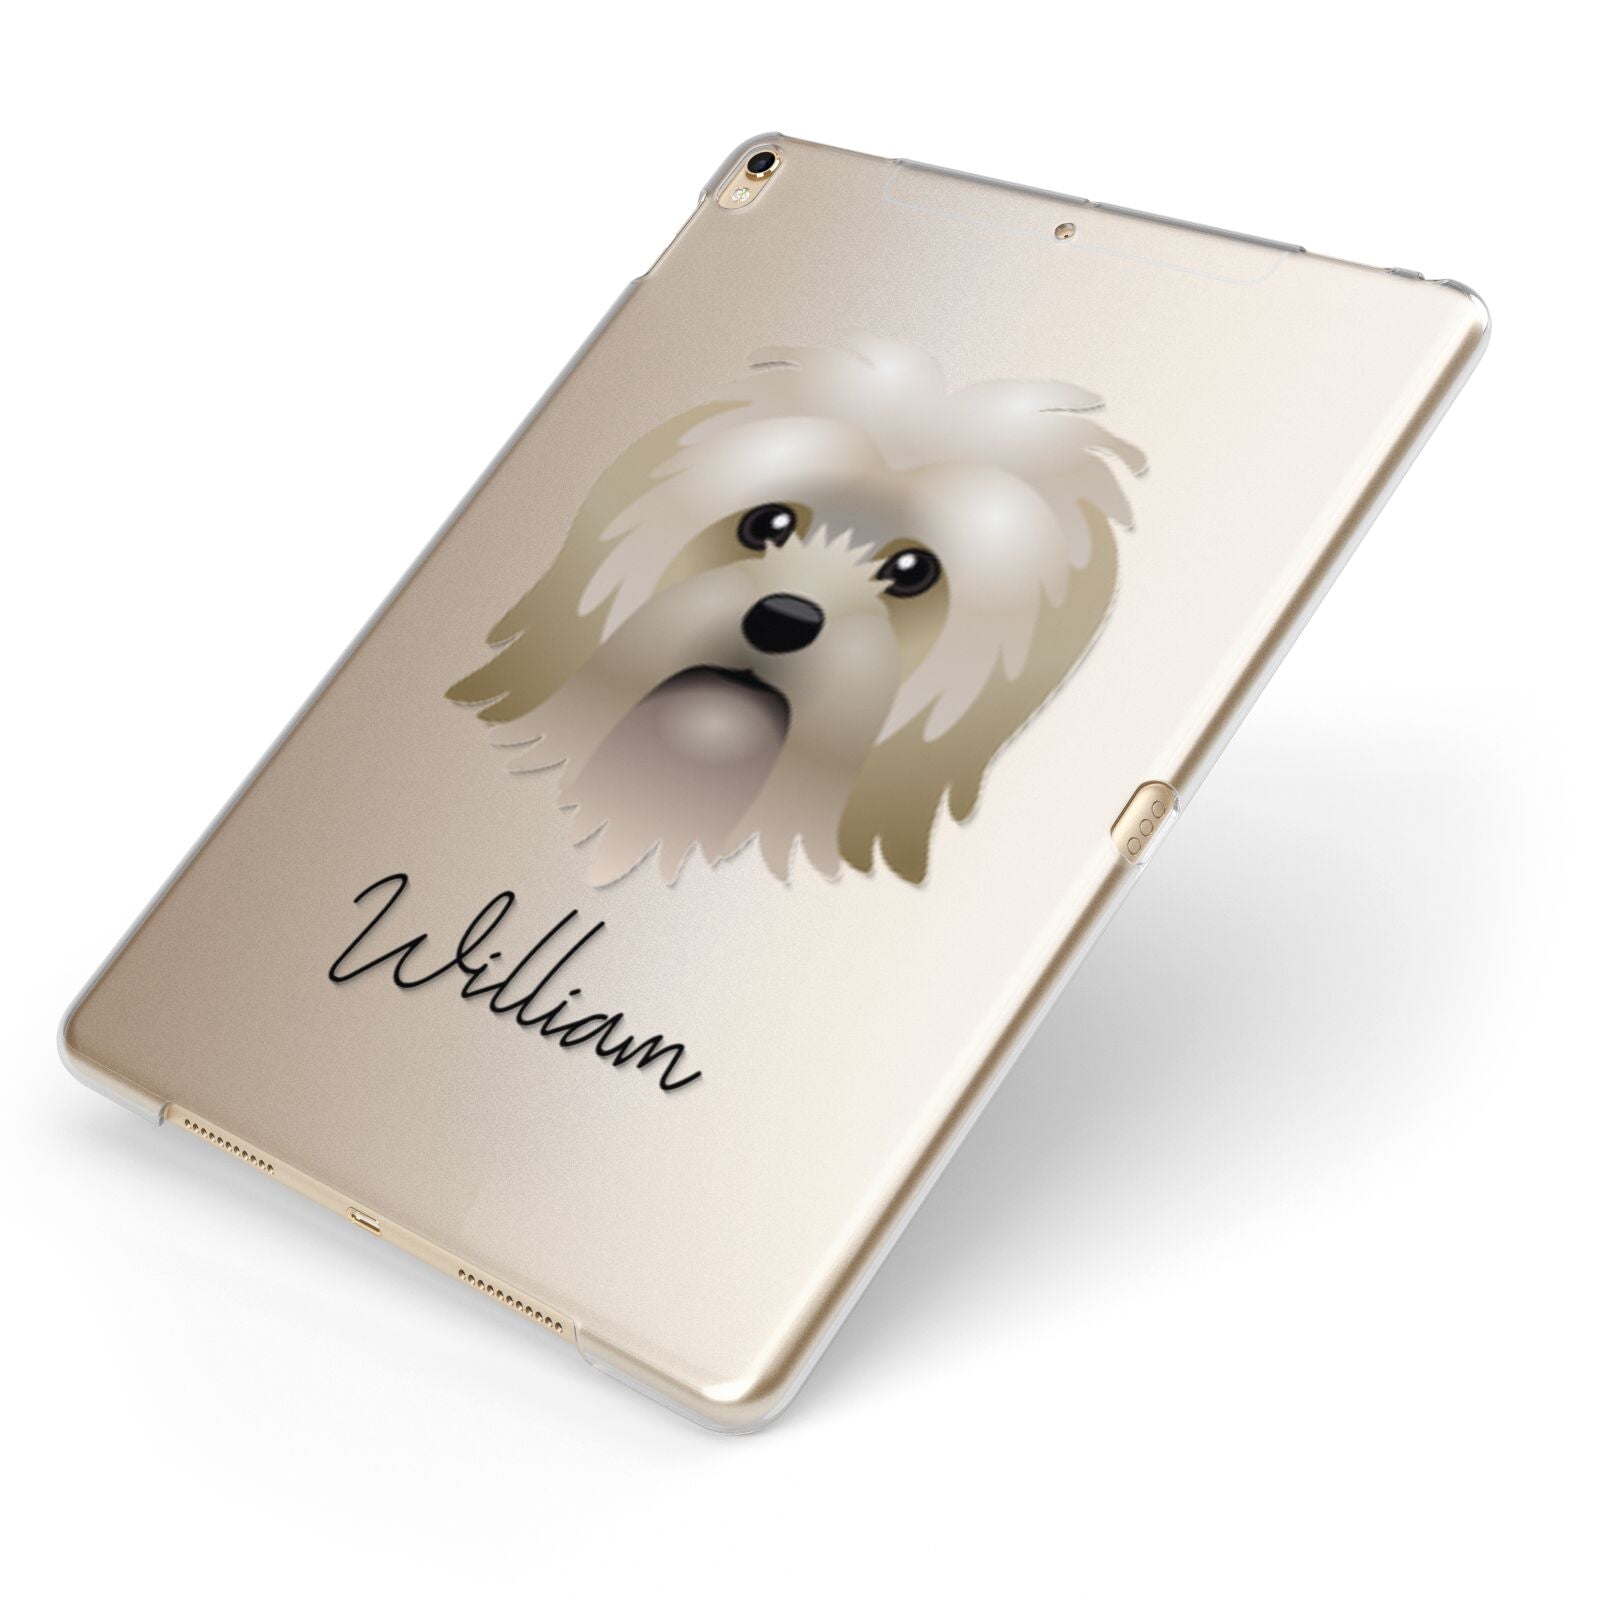 Lo wchen Personalised Apple iPad Case on Gold iPad Side View